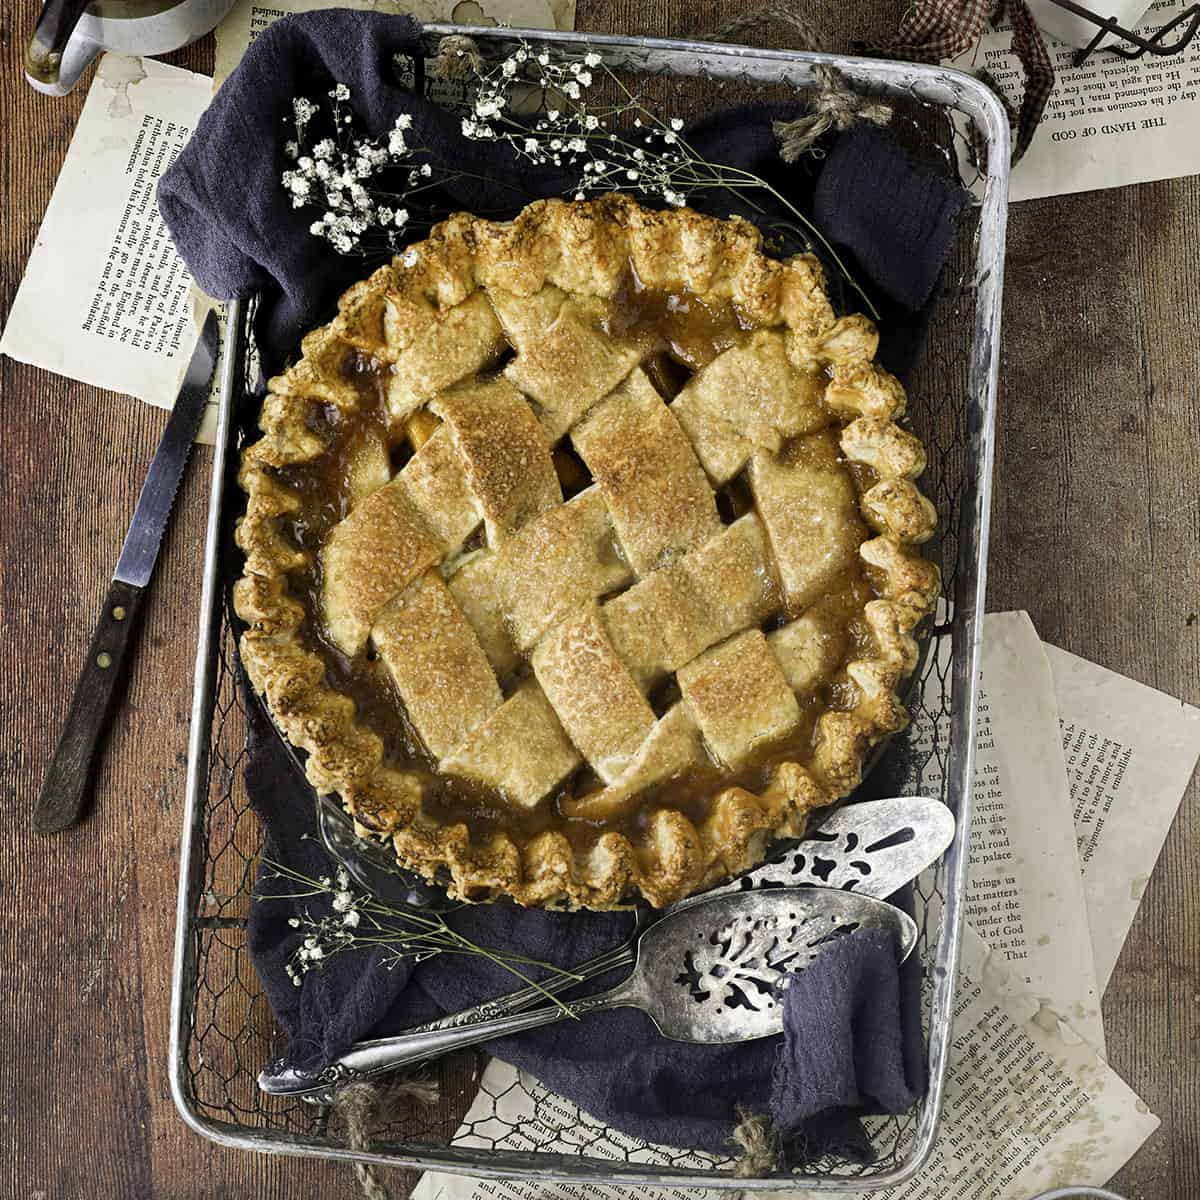 A peach pie, top view, in a wire basket with a dark towel underneath, with some baby's breath flowers and a pie server surrounding. All of a wood surface with recipe pages underneath the basket. 